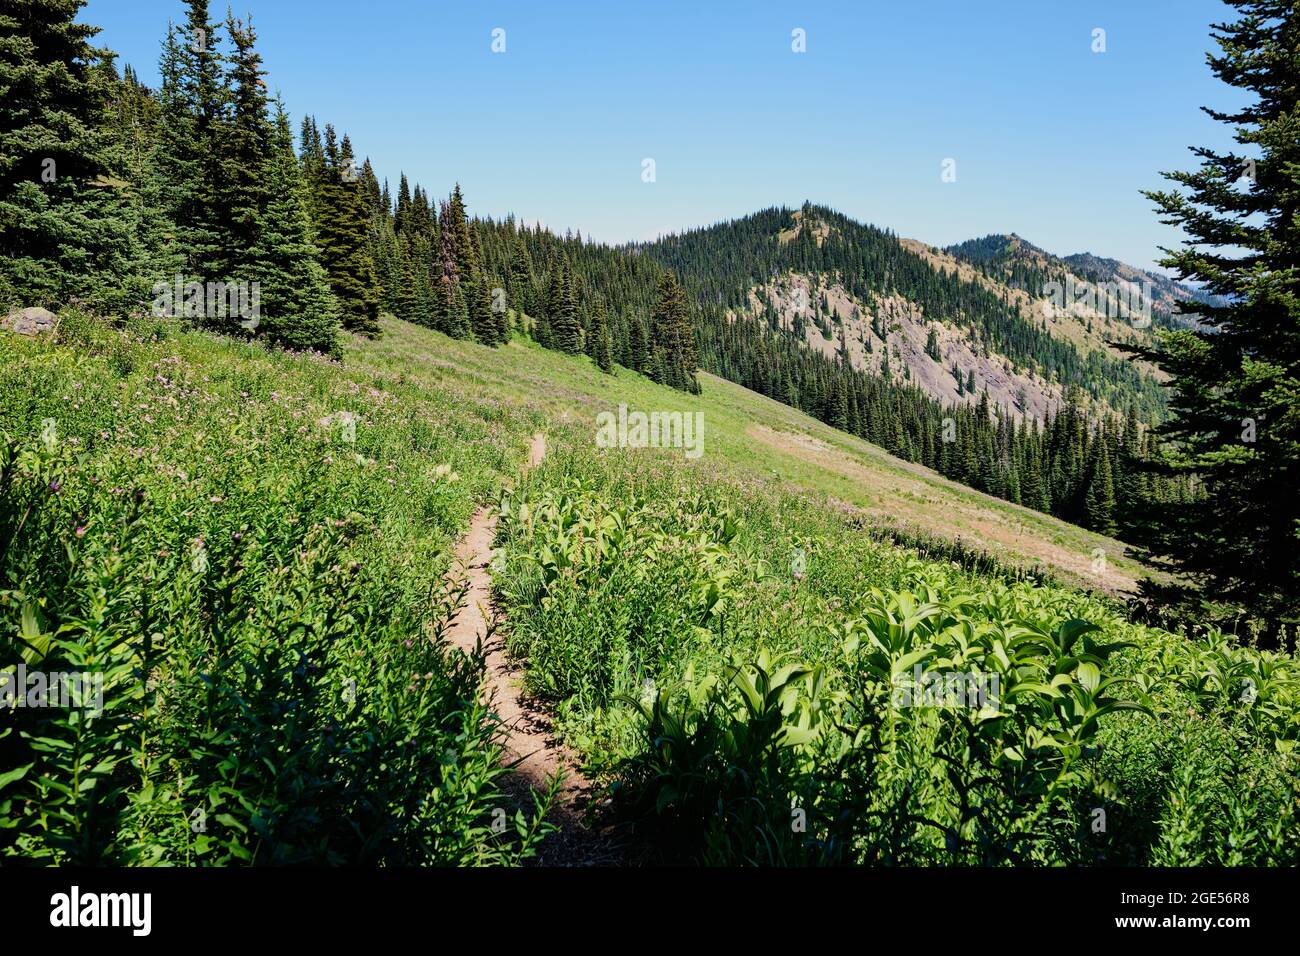 Section of the Manning Park's Skyline trail heading north through flowering alpine meadows.  BC, Canada Stock Photo